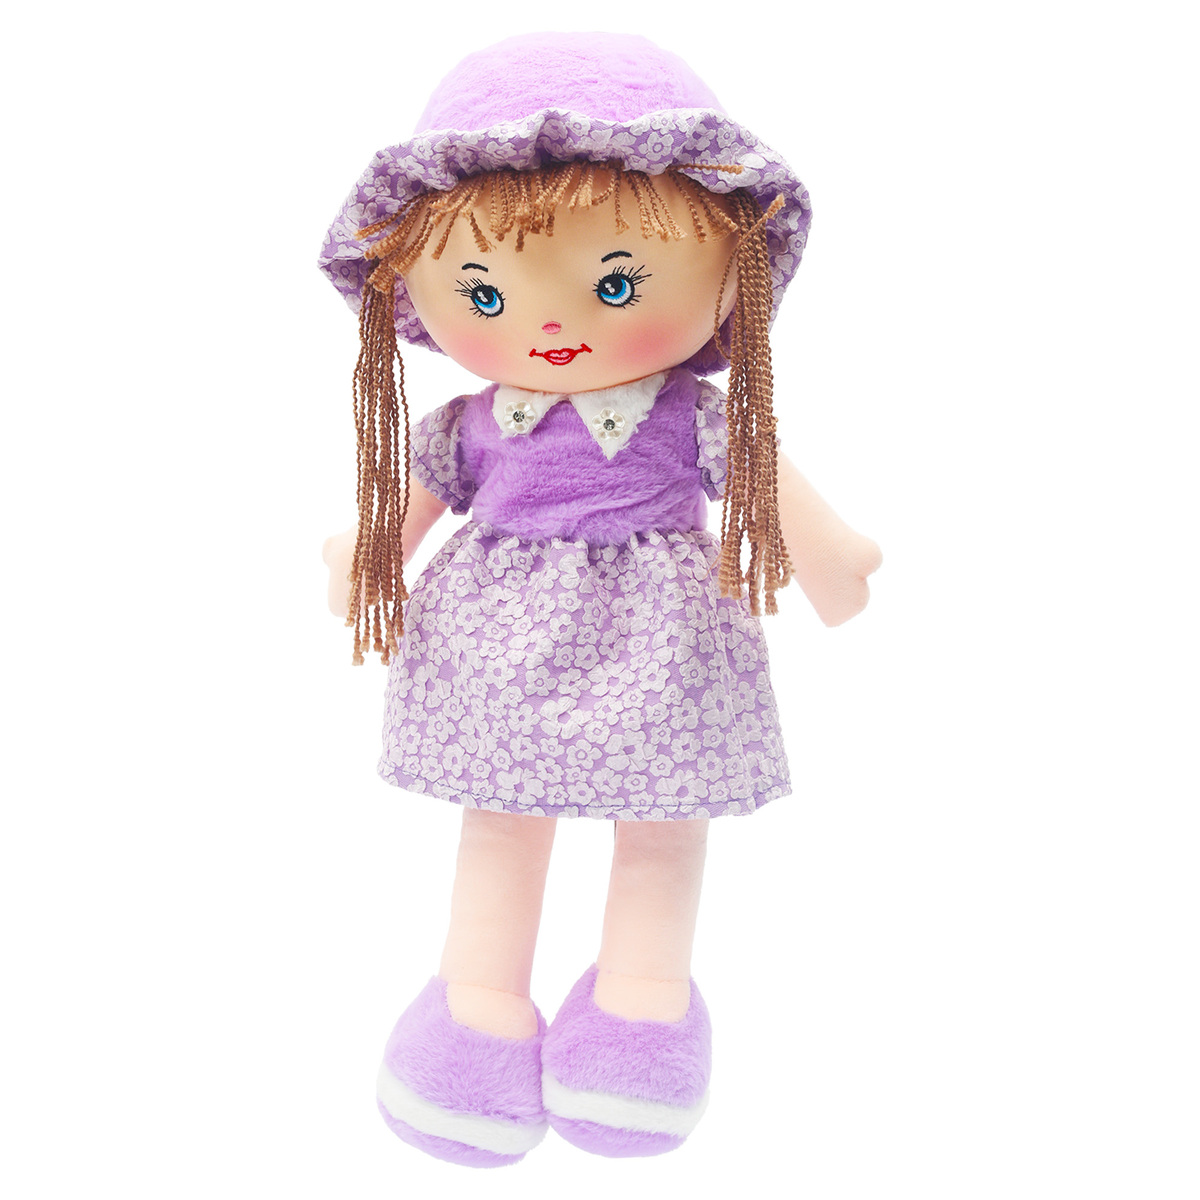 Fabiola Candy Doll With Sound 48cm JN-06 Assorted